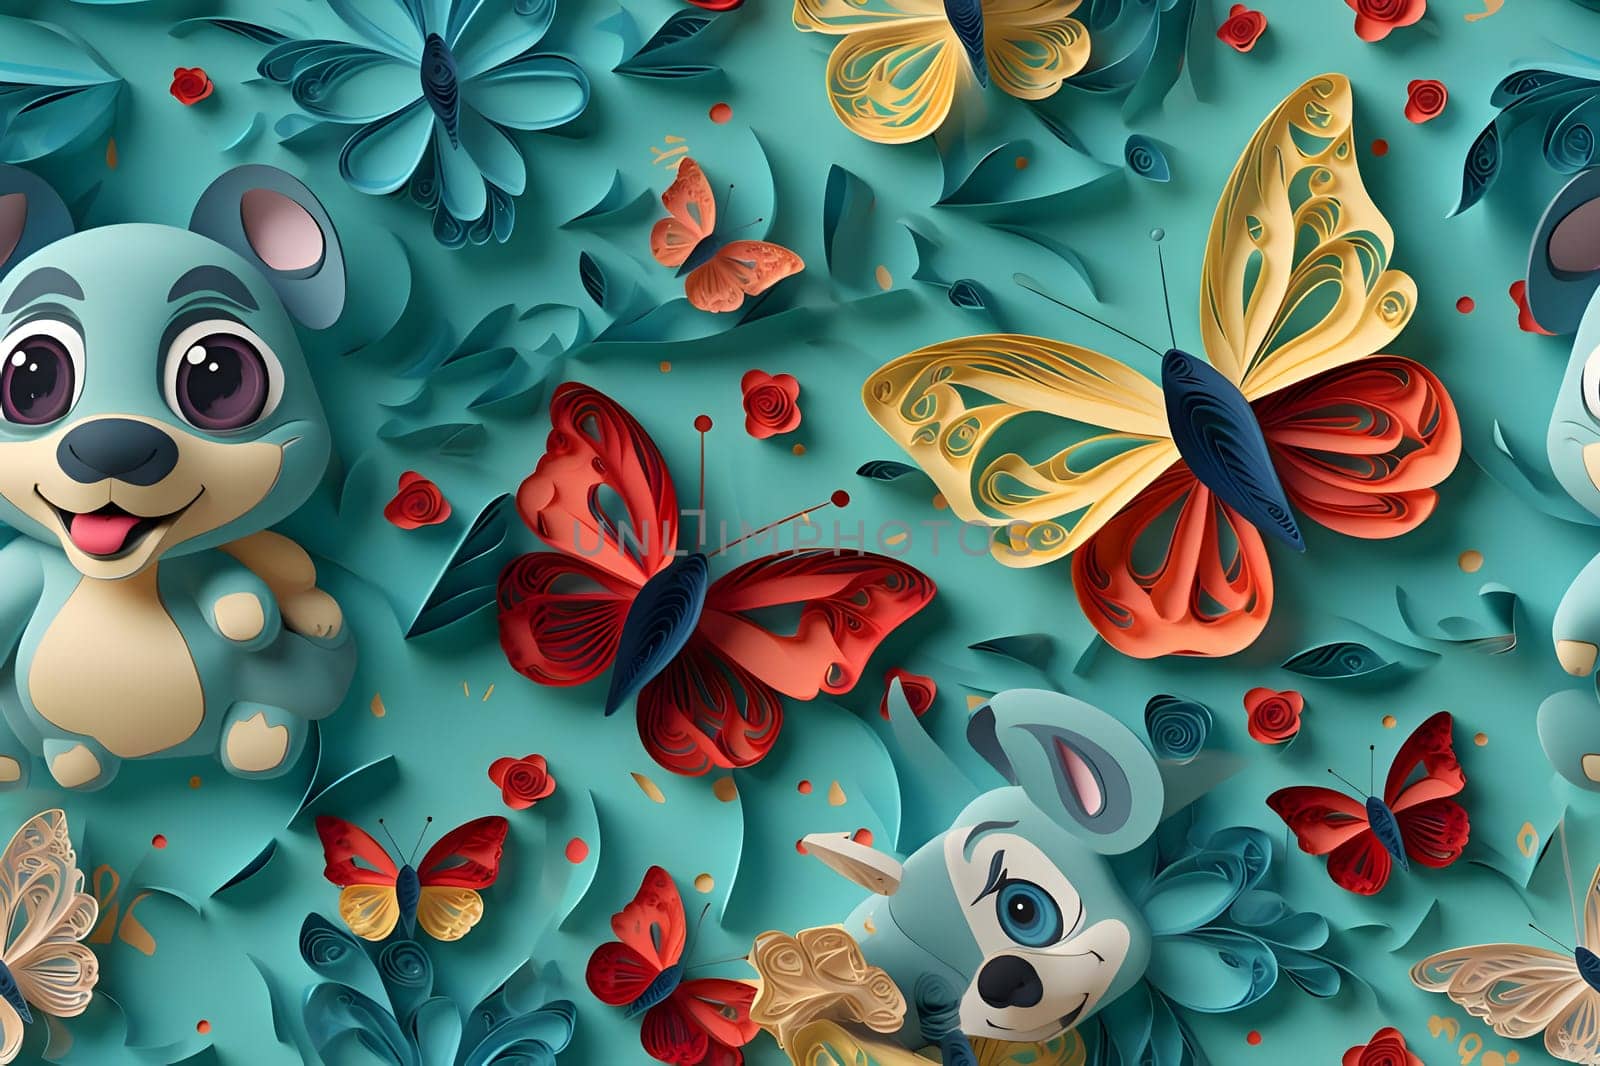 Patterns and banners backgrounds: Seamless pattern with butterflies and animals on a blue background.